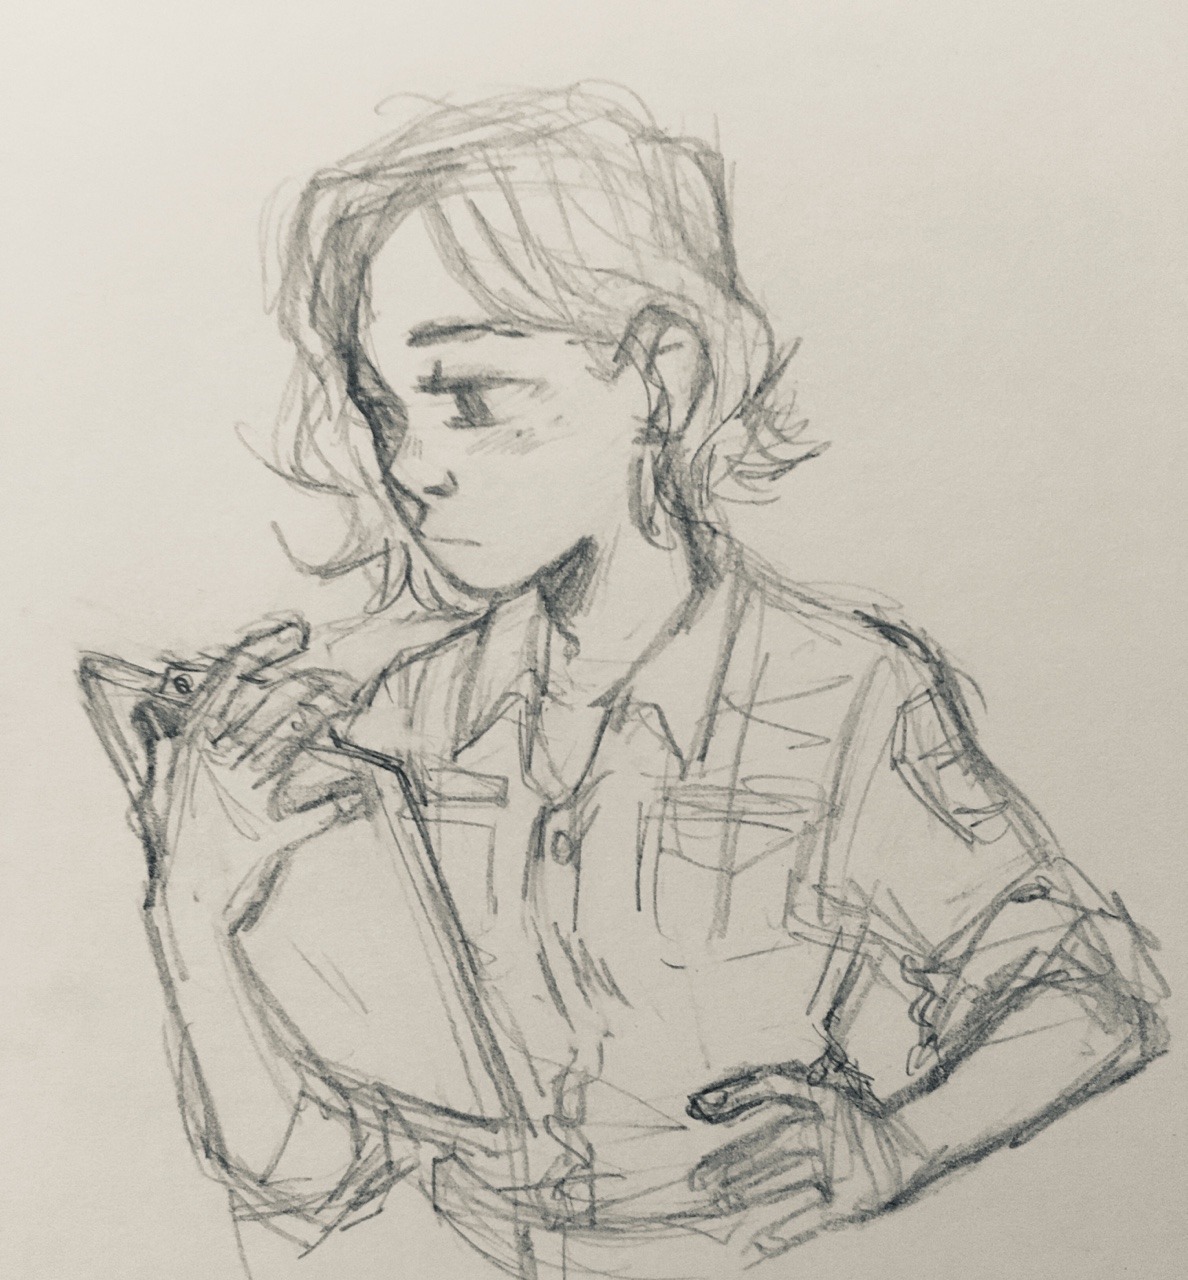 oliviajoytaylor: I haven’t drawn Nicole haught in a long time and it shows  